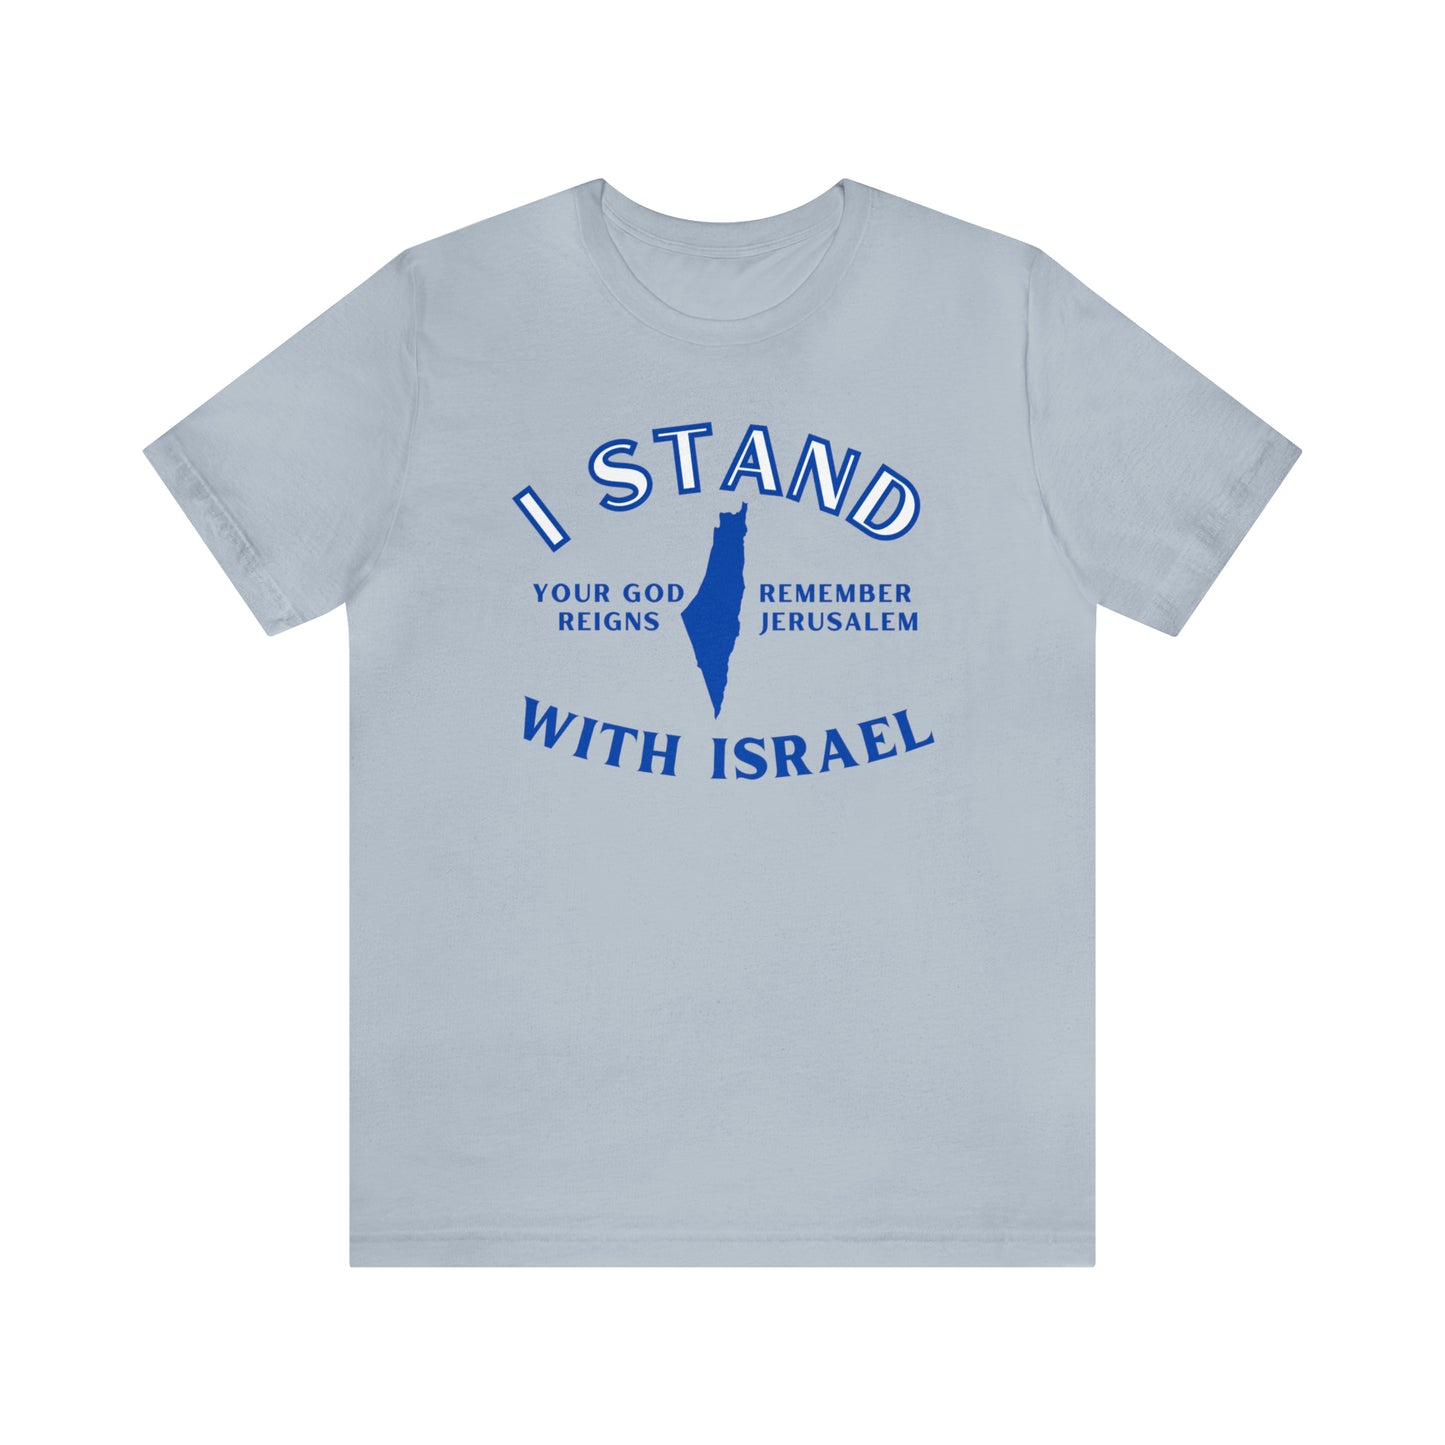 I Stand With Israel (Green Pastures Apparel)